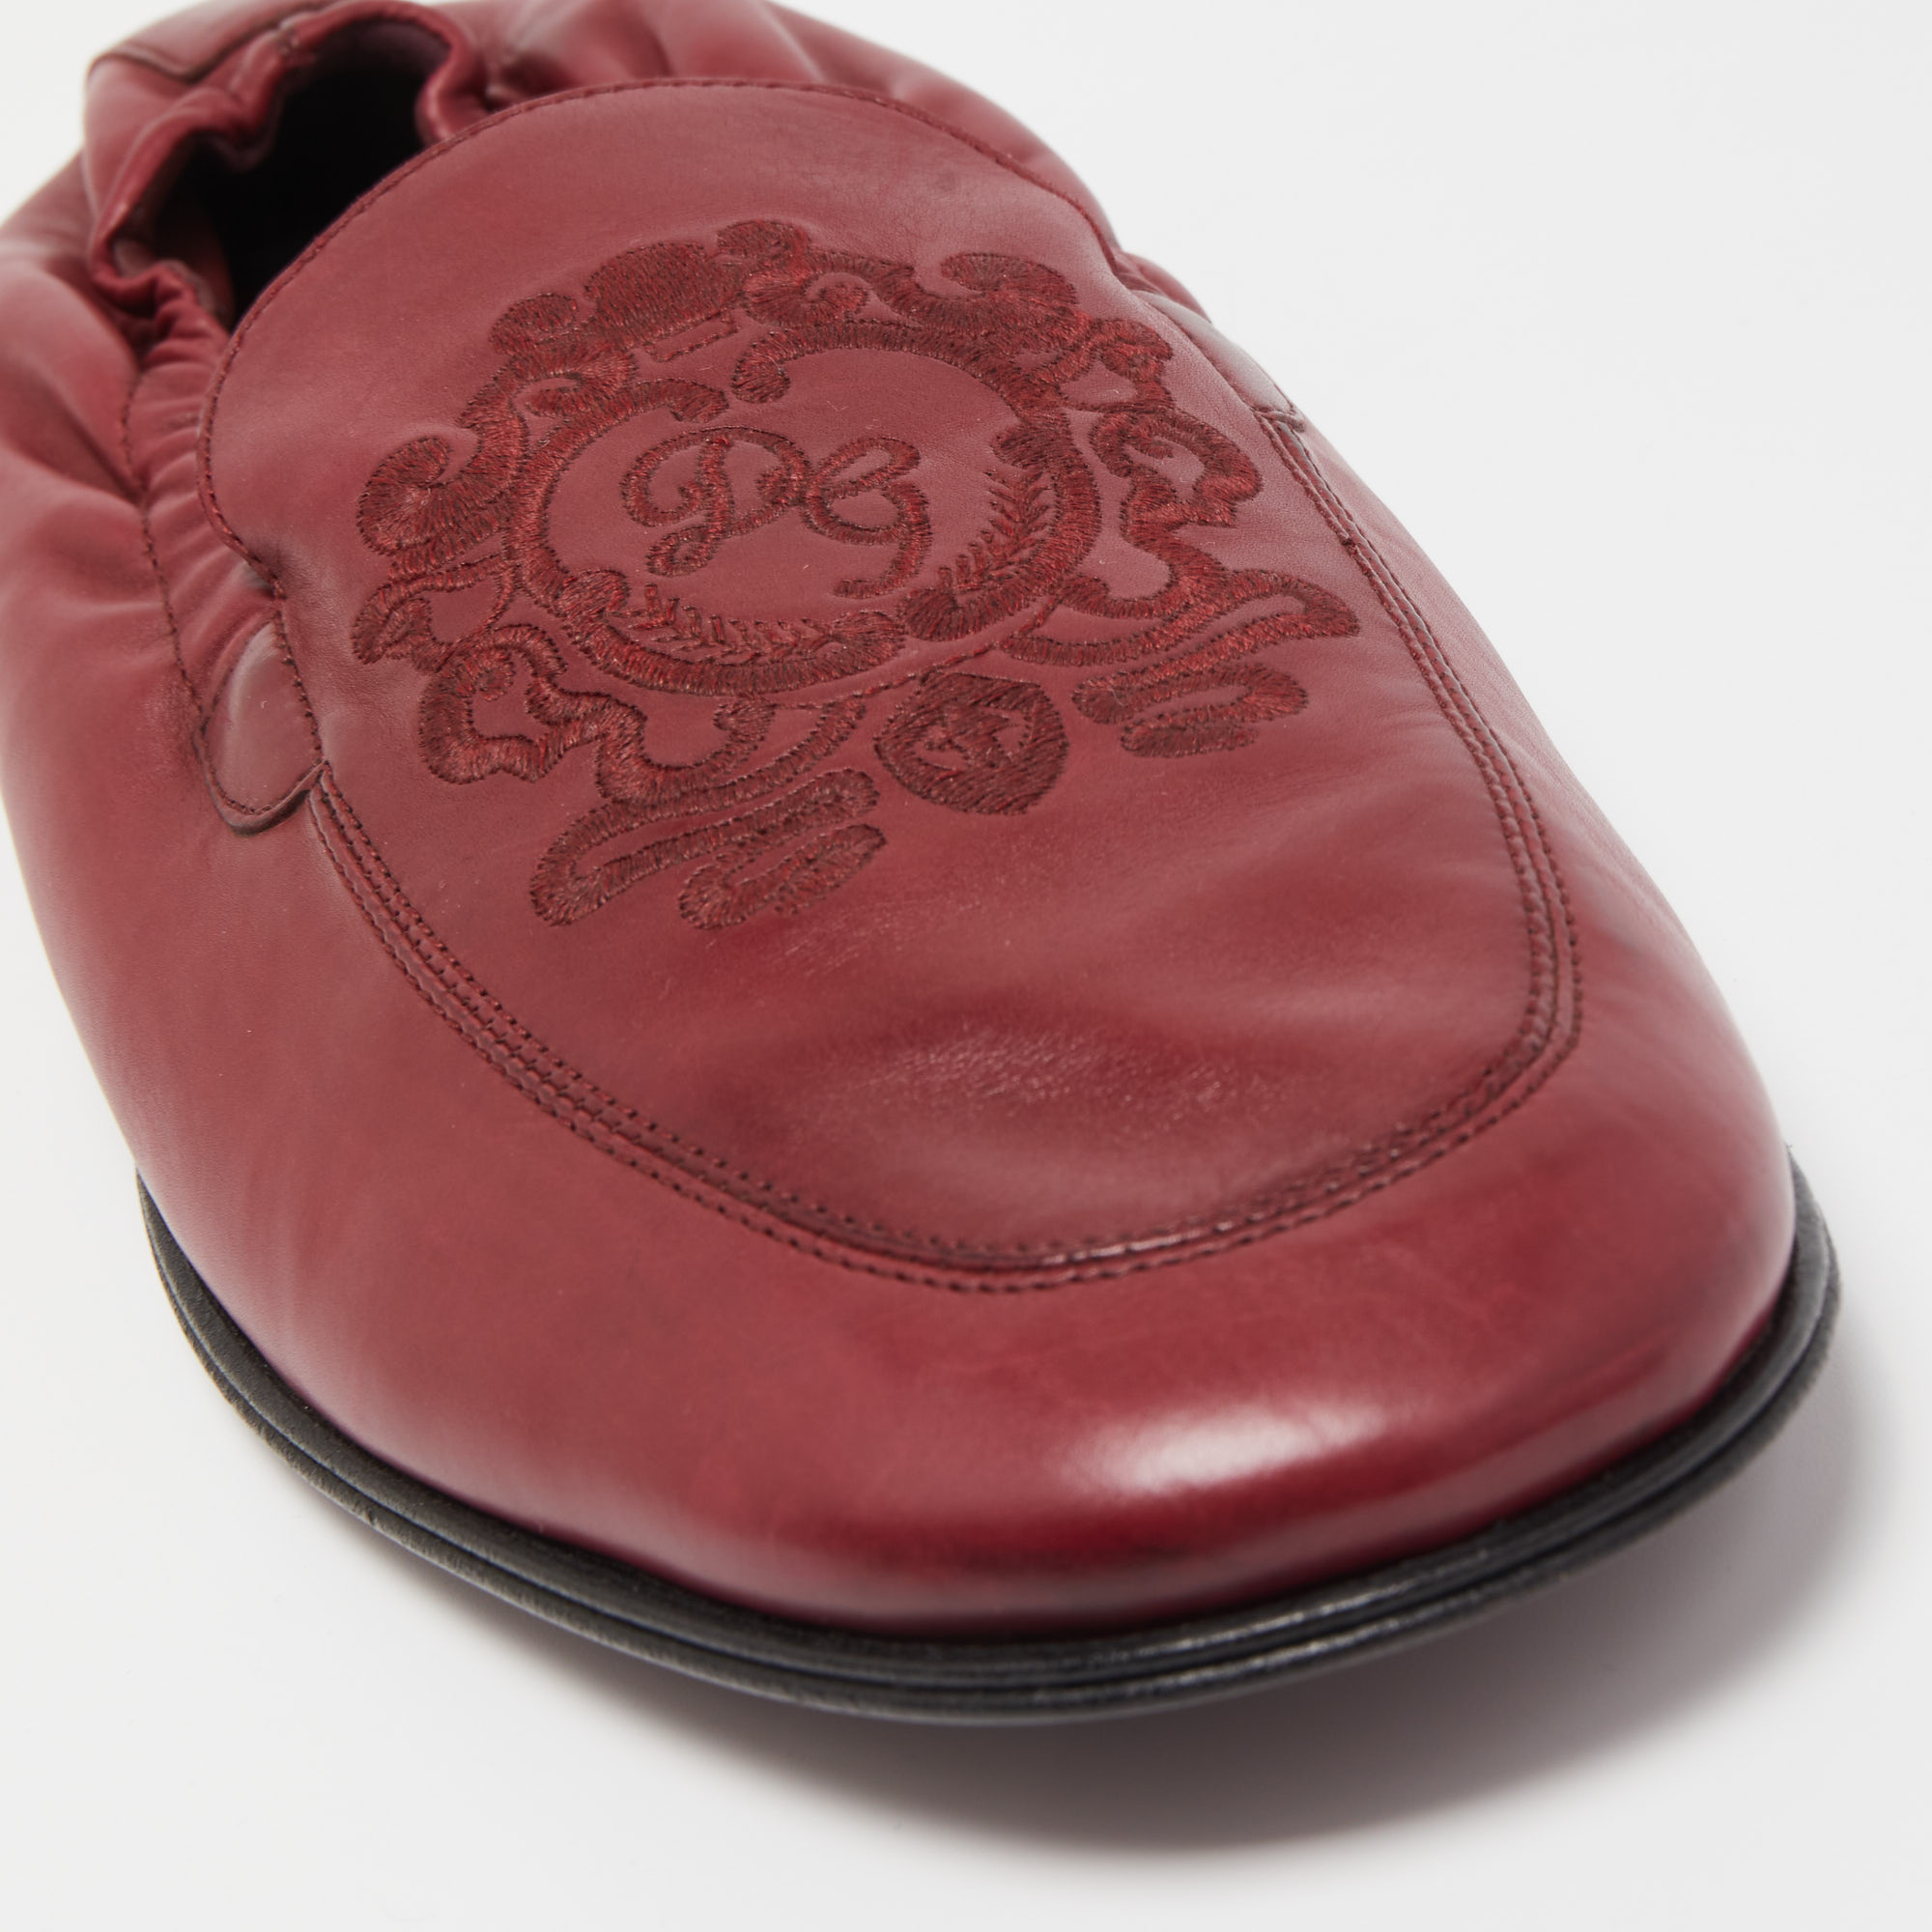 Dolce & Gabbana Burgundy Embroidered Leather Scrunch Smoking Slippers Size 43